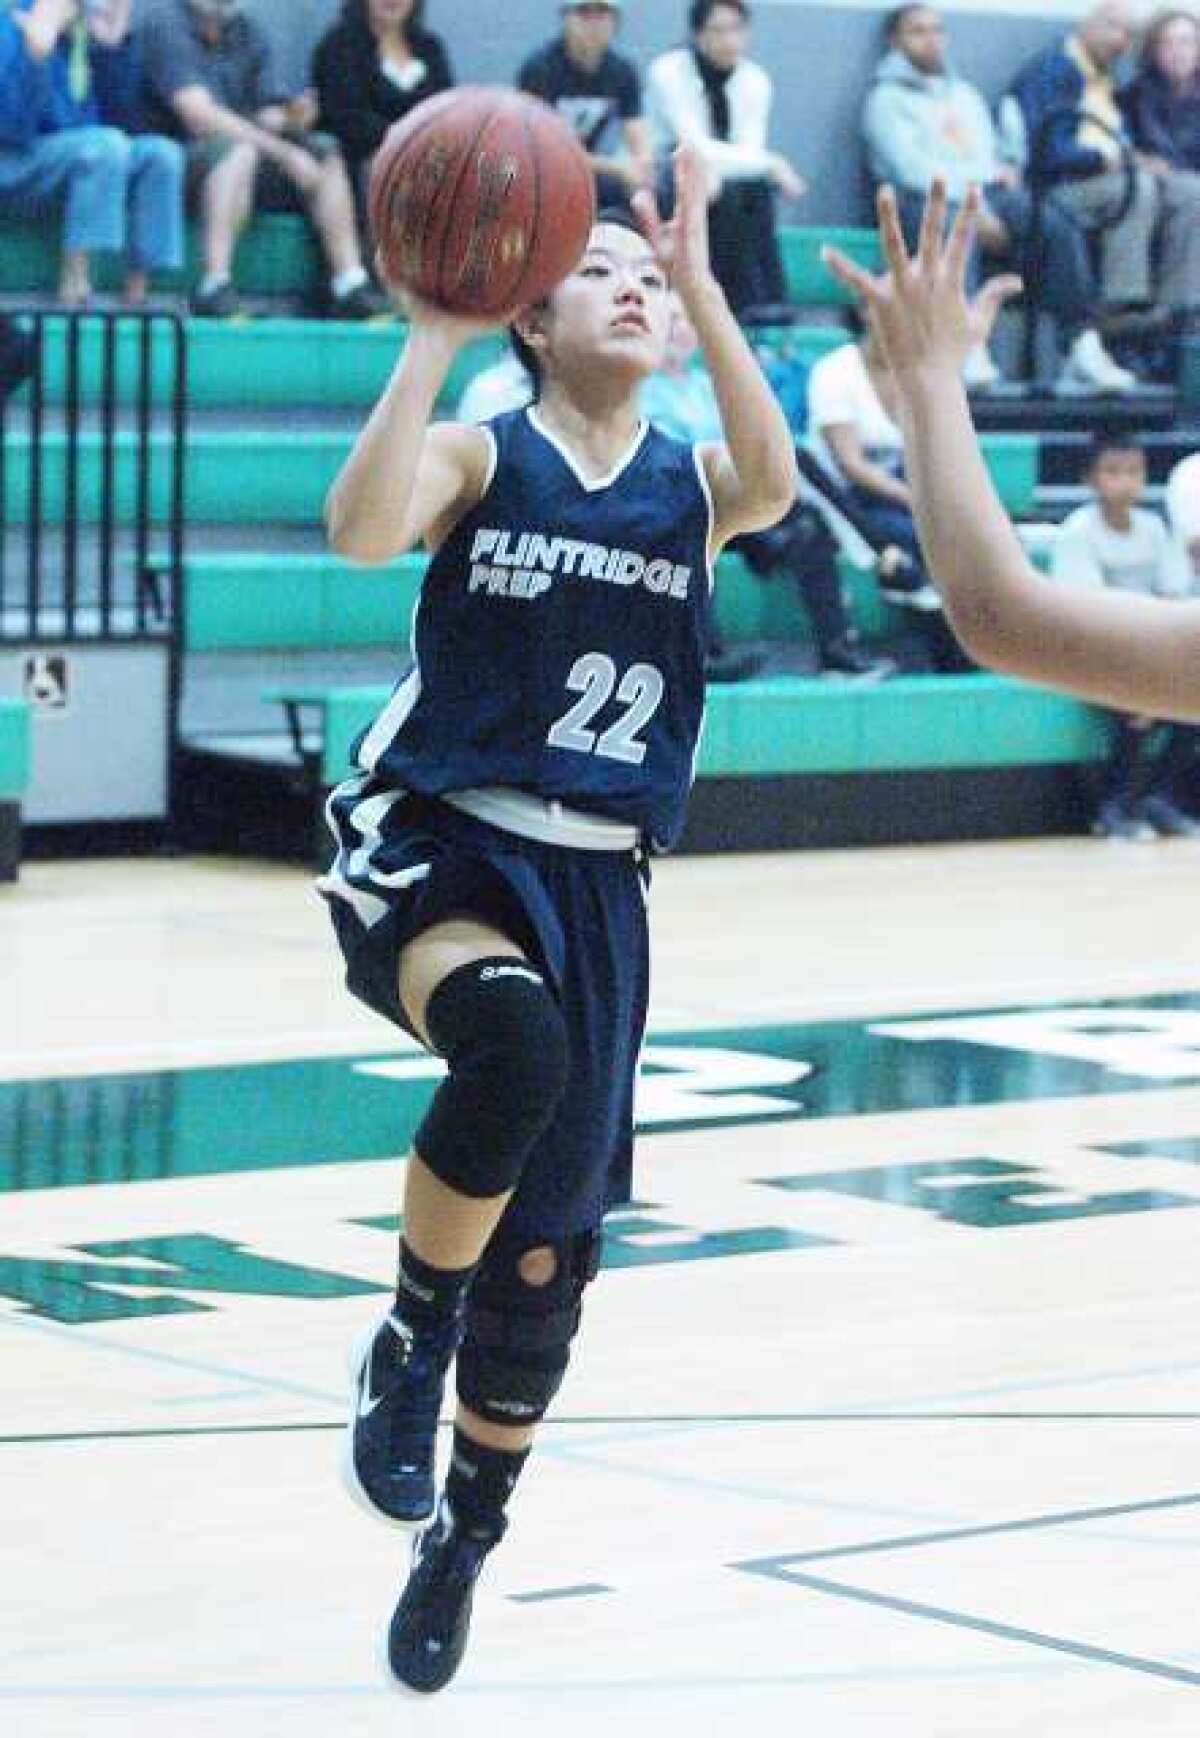 Maya Okamoto scored 13 points for the Flintridge Prep, including a key three-pointer to bring the Rebels within 2 points with 6 seconds remaining.